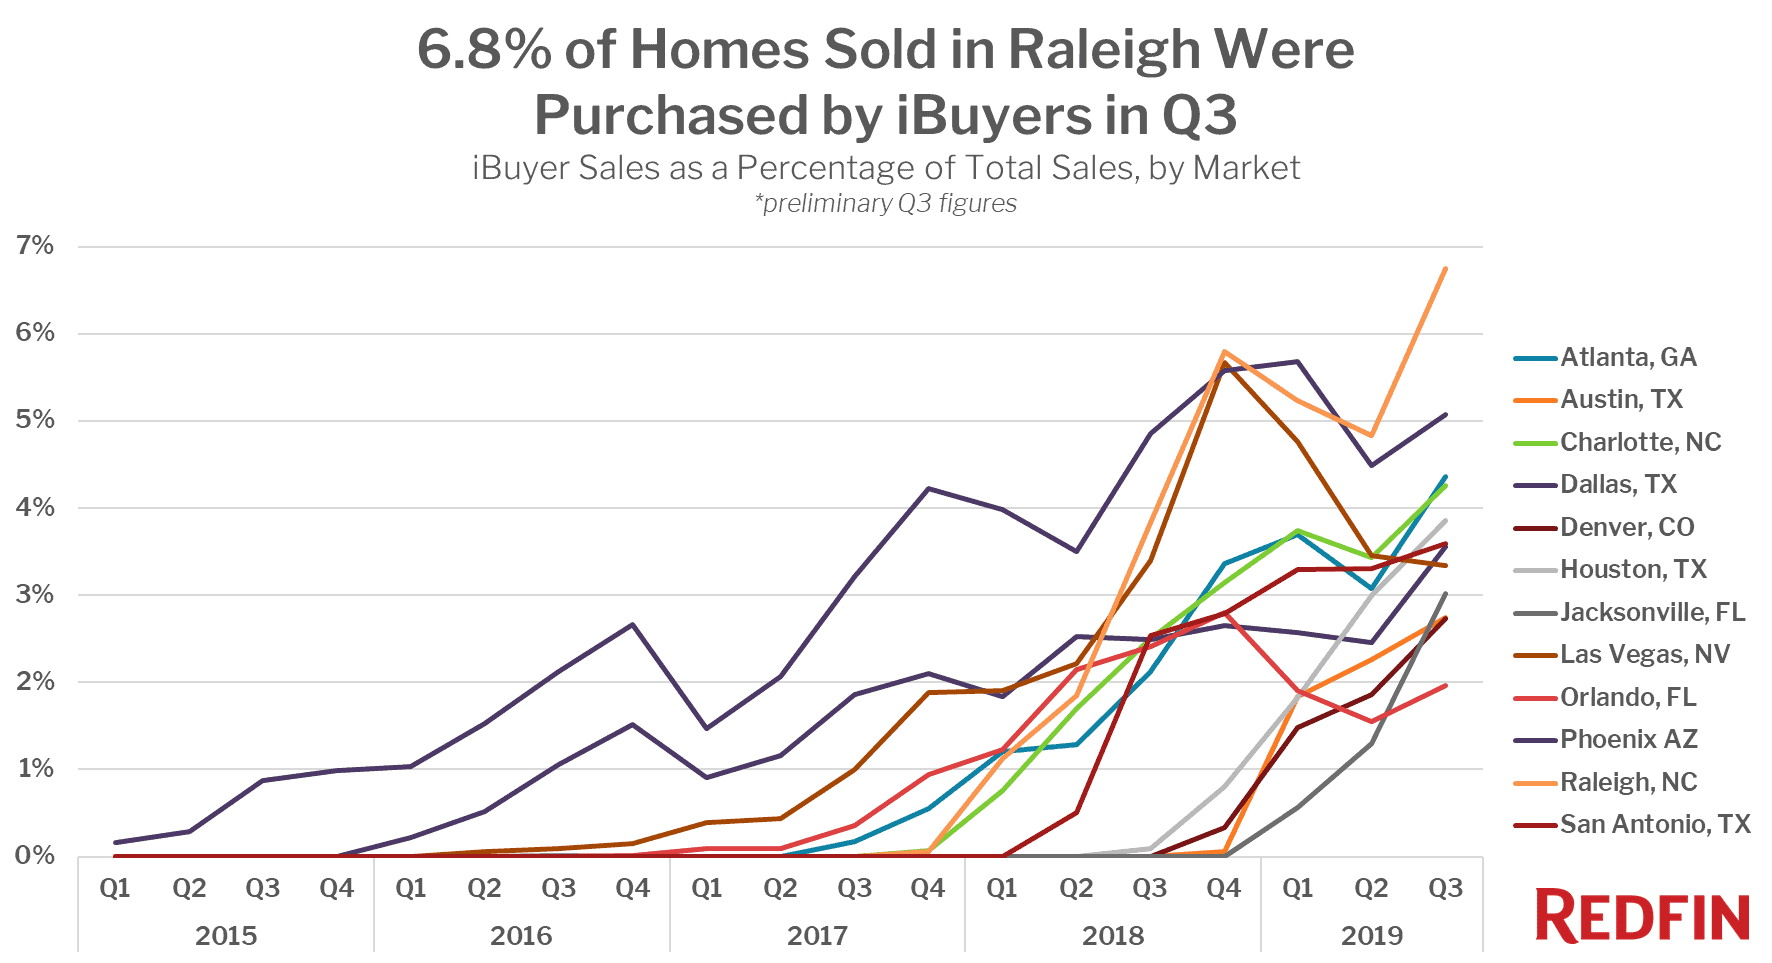 6.8% of Homes Sold in Raleigh Were Purchased by iBuyers in Q3